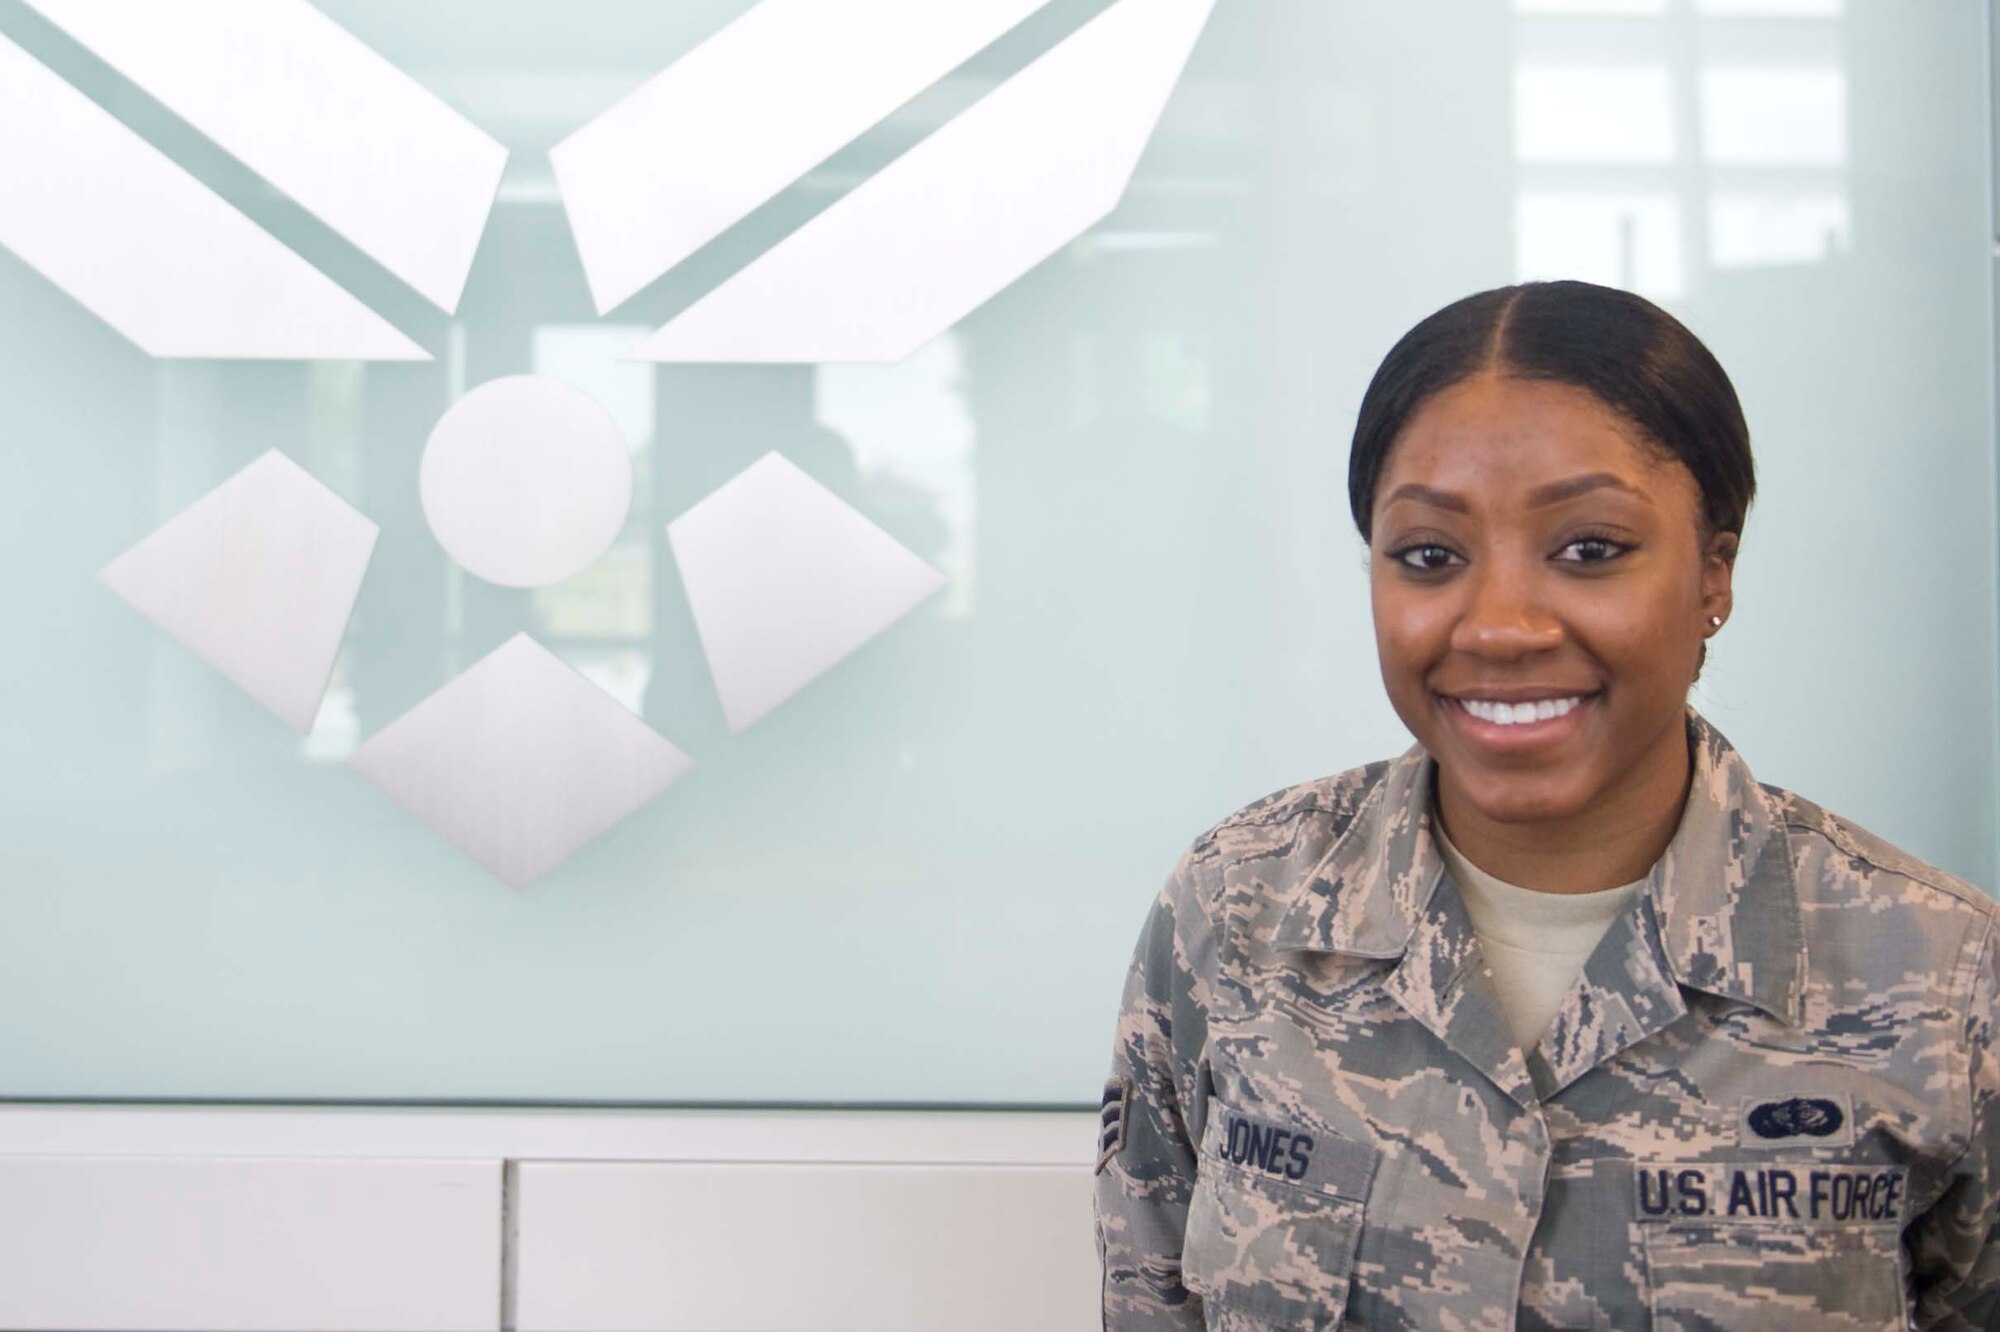 “One memory I have of my mother is her coming in my room every single morning and giving me a kiss on the forehead and telling me she loves me. It didn’t matter if she was mad at me or if I was sick. A mother’s kiss and love is the best medication.” – Senior Airman Jacqueline Jones, 99th Force Support Squadron fitness specialist